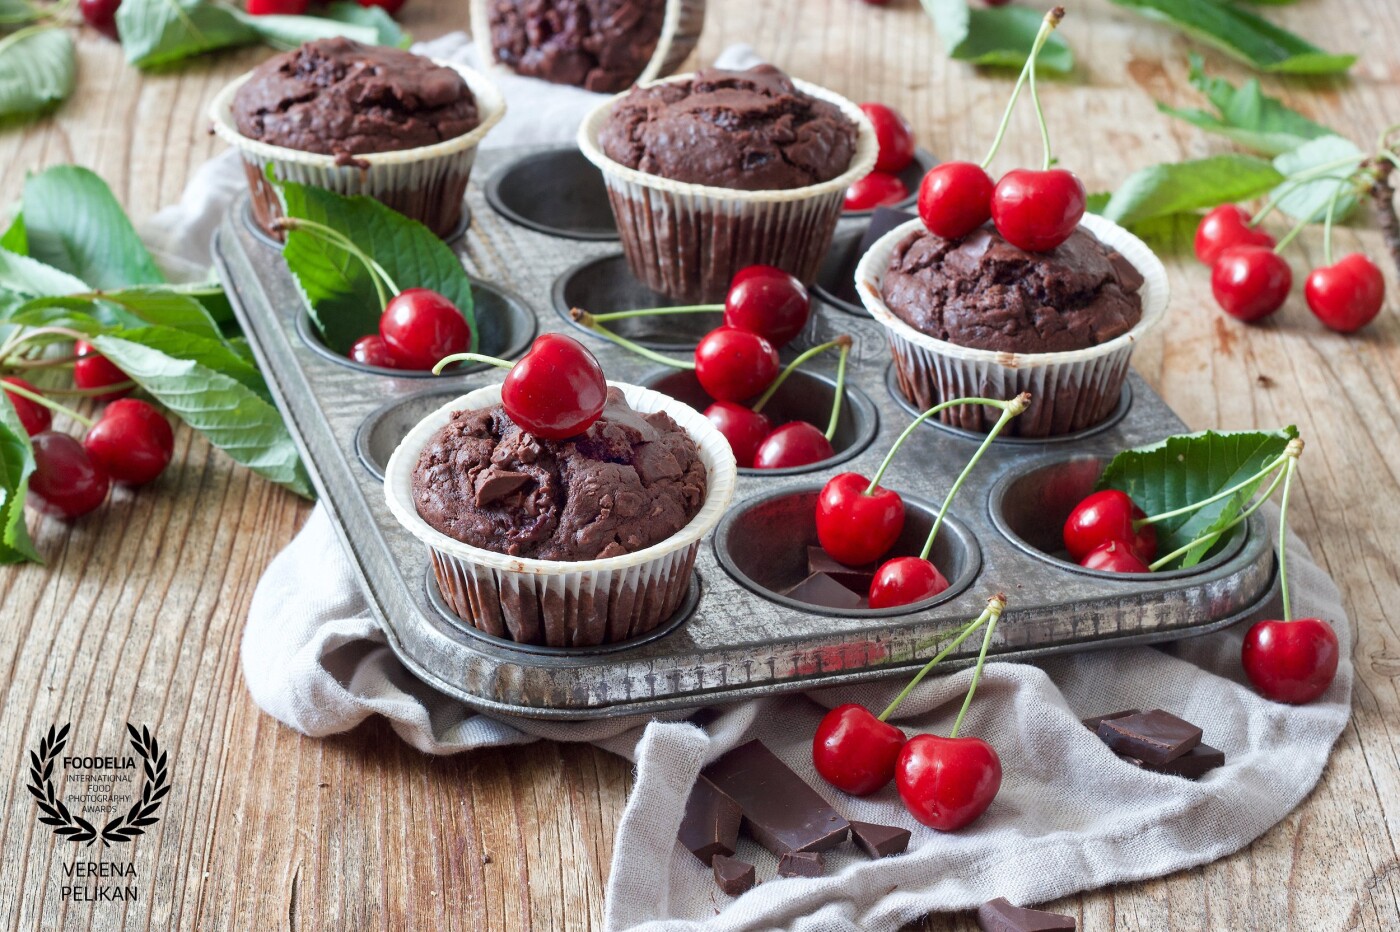 Moist chocolate cherry muffins- these chocolate muffins are bursting with fresh cherries and chocolate chips. Recipe can be found on my website: https://www.sweetsandlifestyle.com/rezept/schoko-kirsch-muffins/